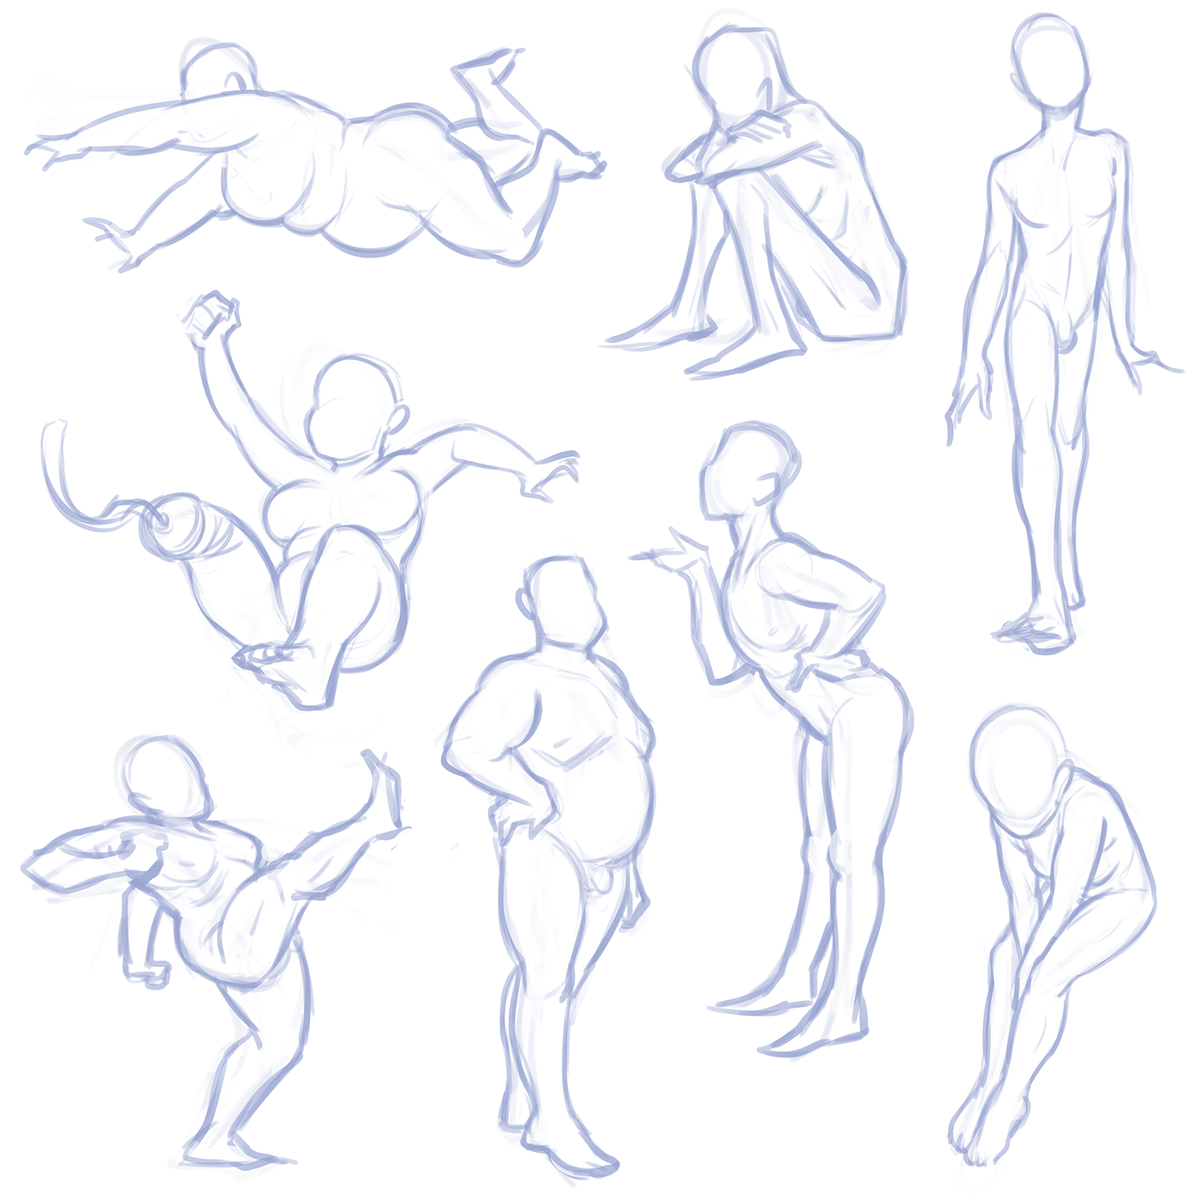 ollie on X: Playing around with drawing different body types is one of my  fav things to do as an artist, so I took some Me Time to just do it a